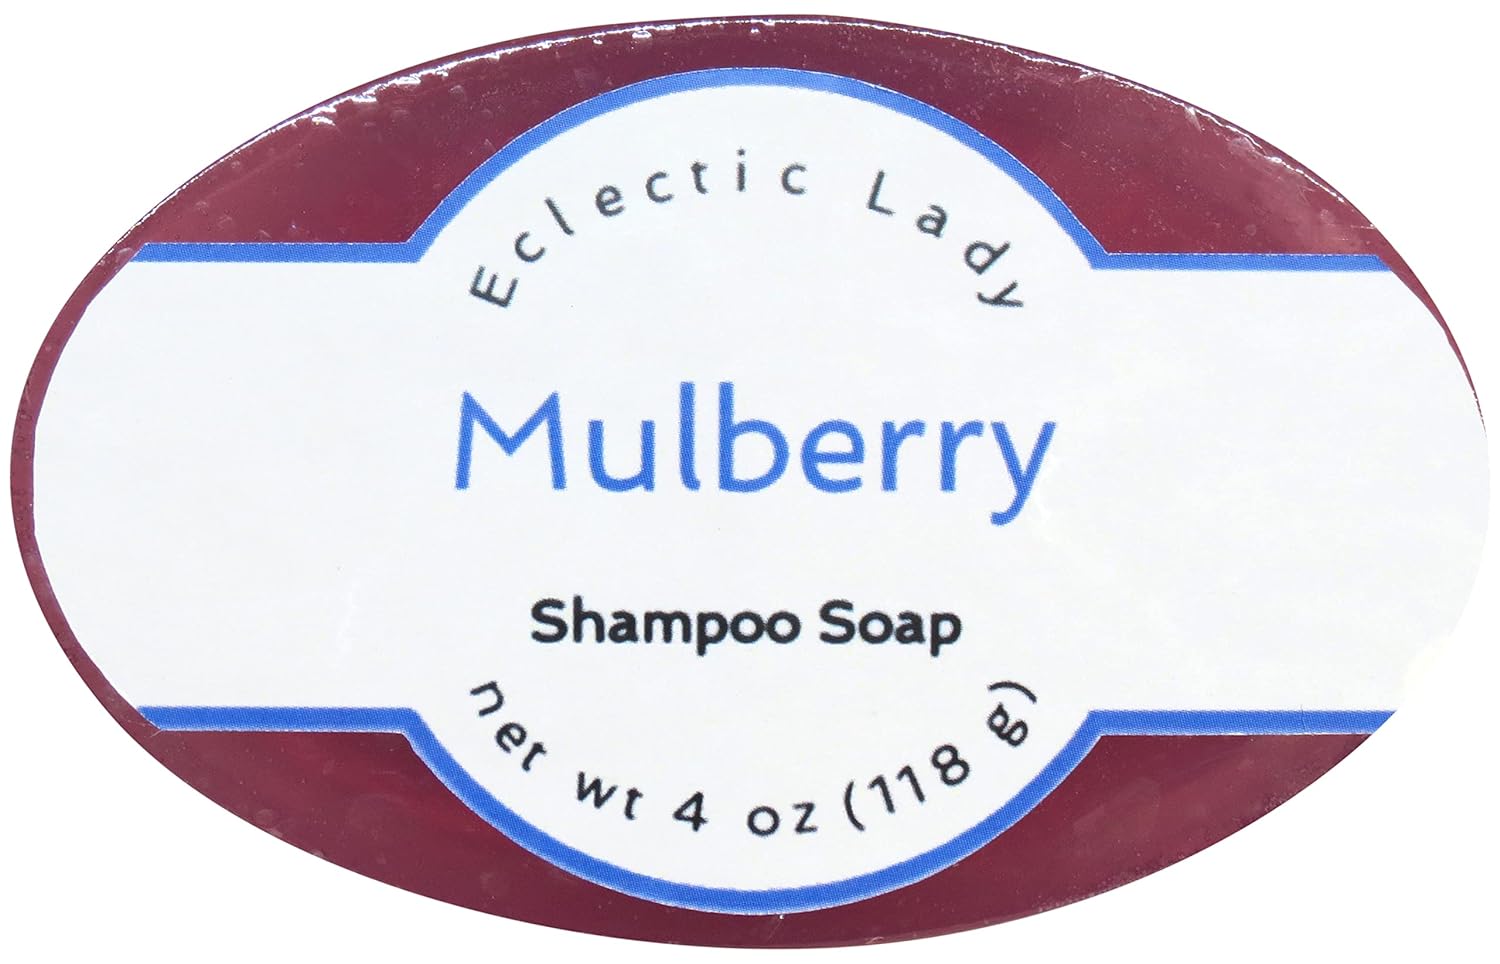 Eclectic Lady Mulberry Shampoo Soap Bar with Pure Argan Oil, Silk Protein, Honey Protein and Extracts of Calendula ower, Aloe, Carrageenan, Sunower - 4  Bar